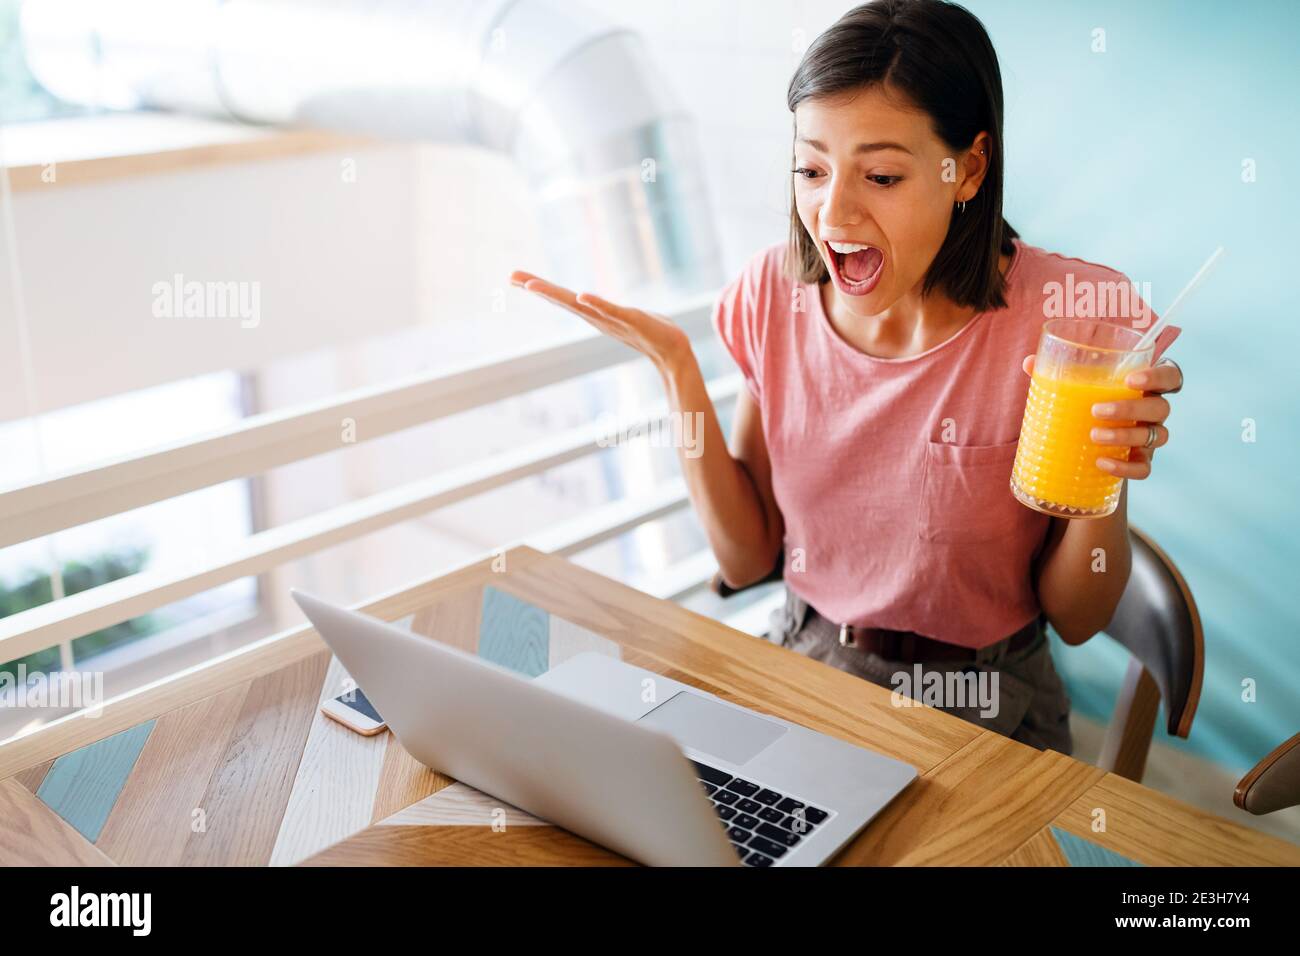 Confused shocked beautiful young woman looking at tablet computer Stock Photo